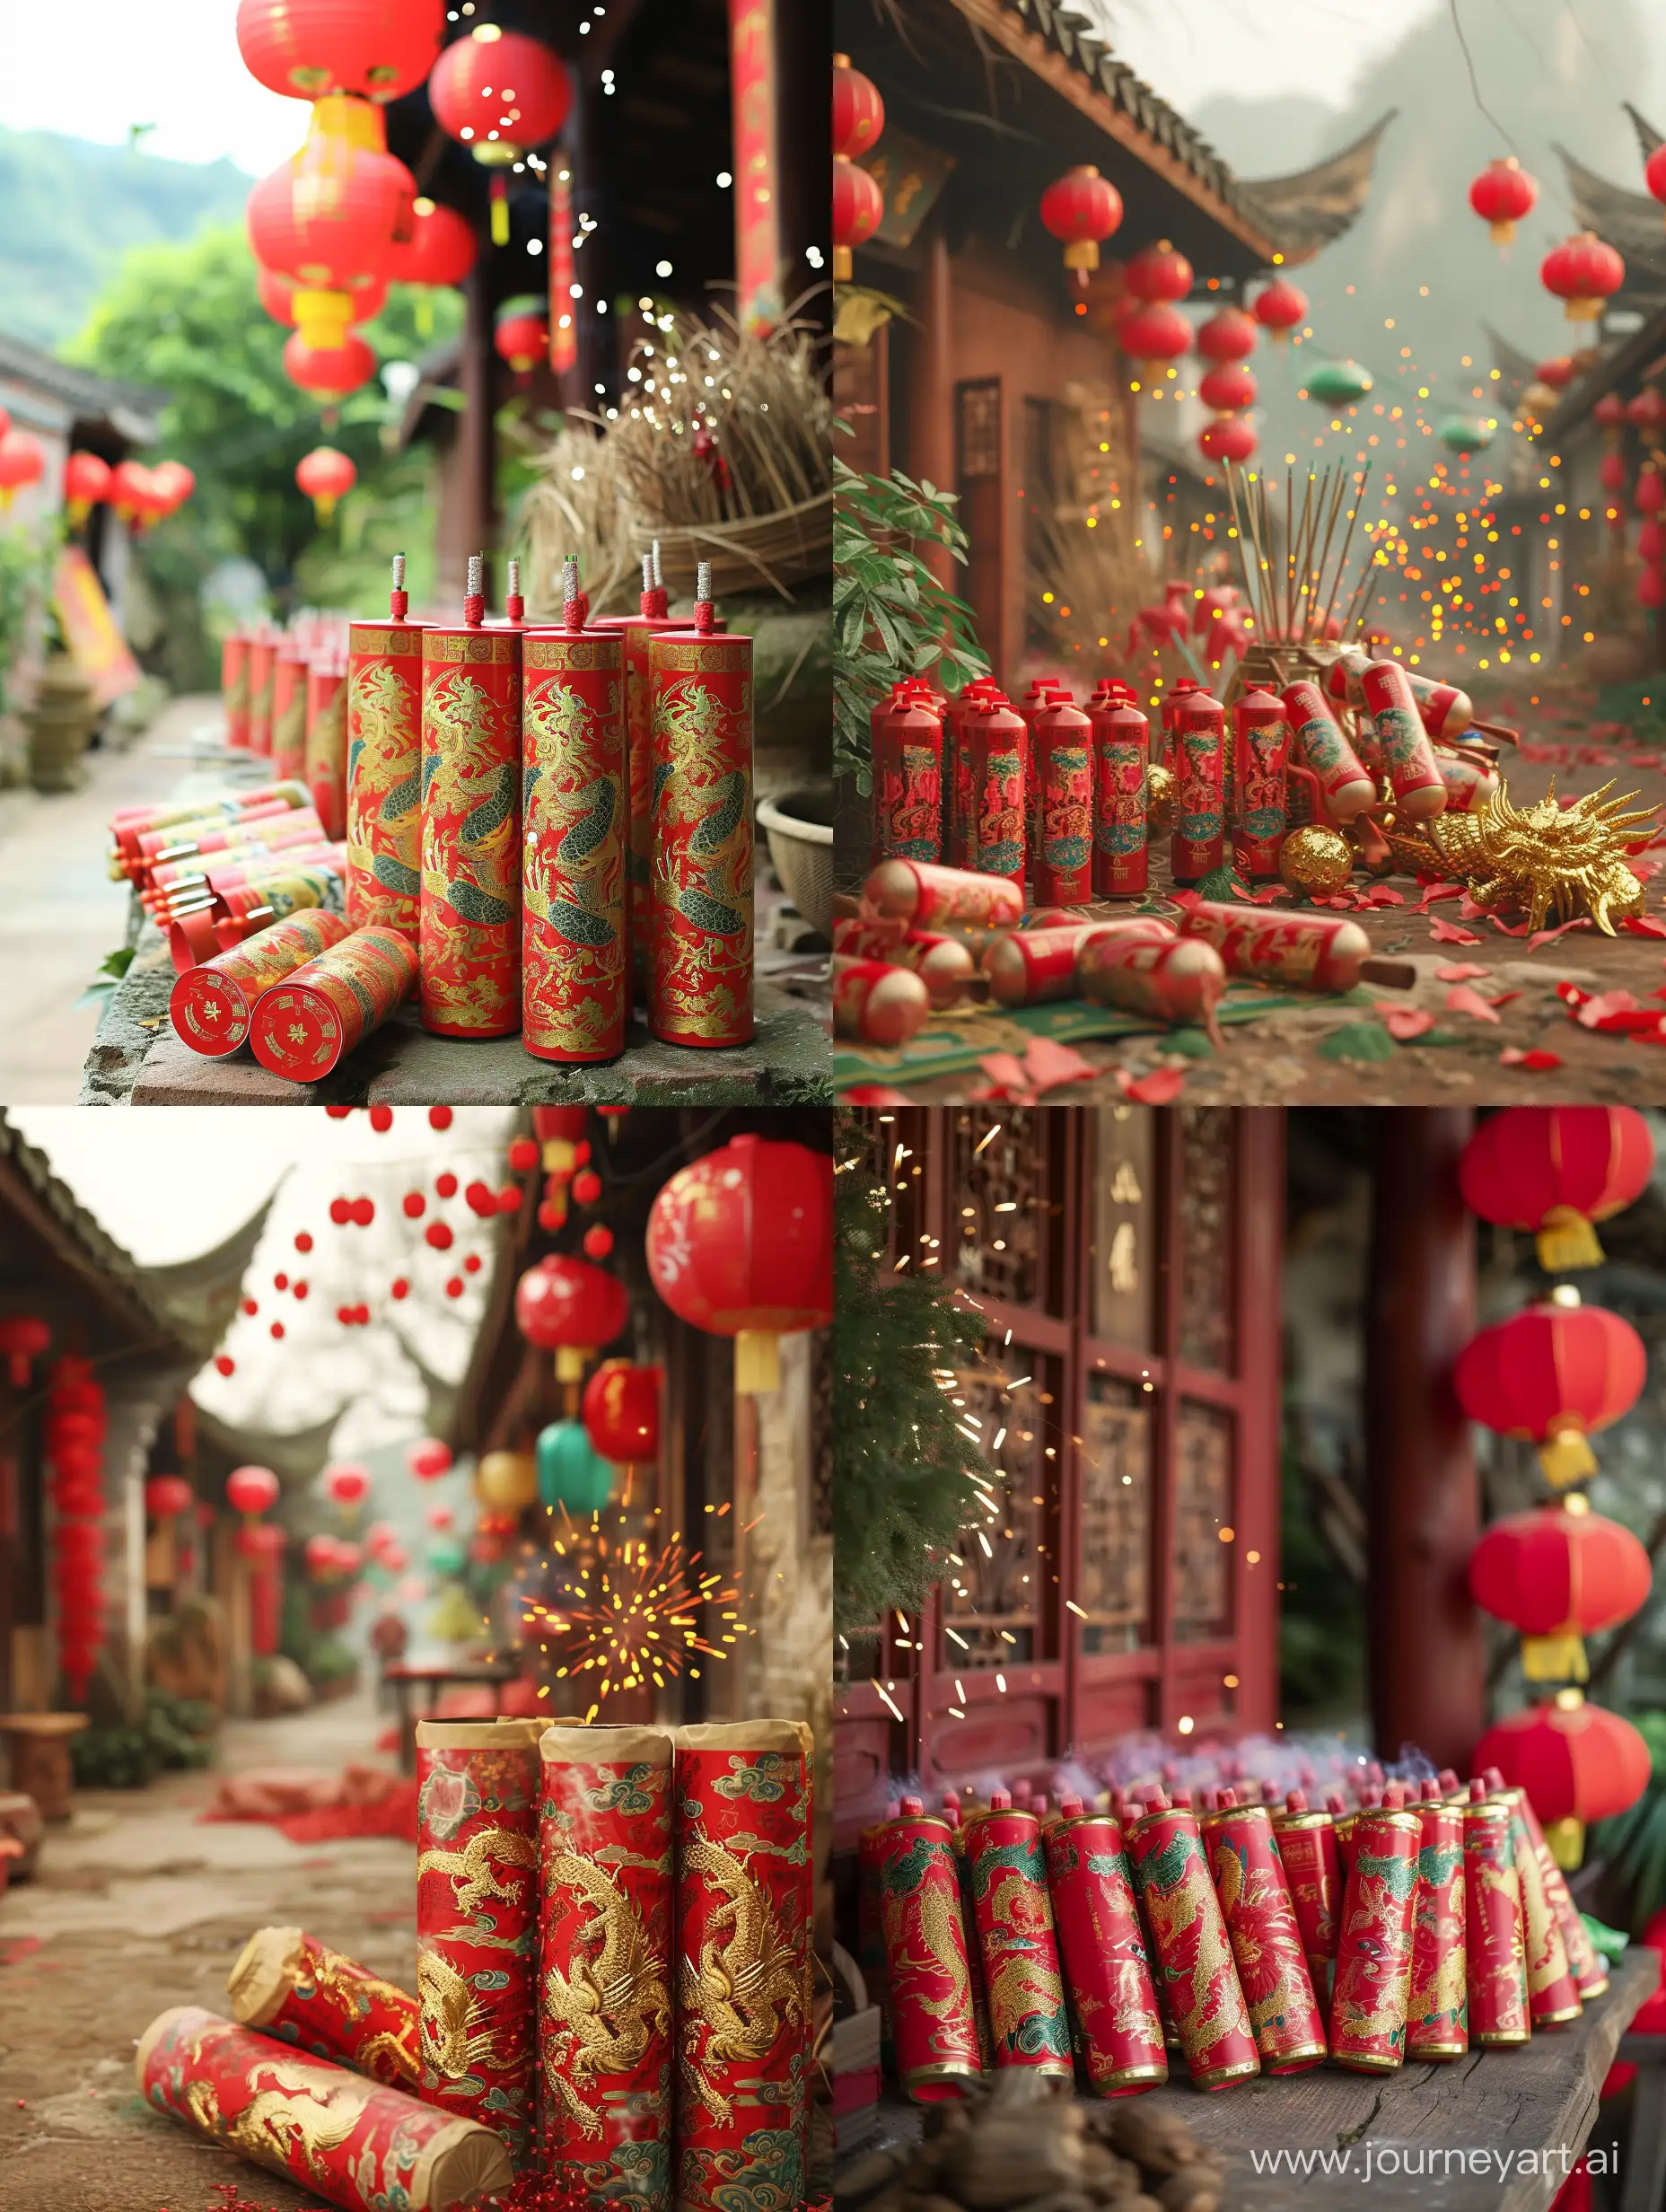 (The image of the golden dragon in Chinese mythology), (Harmonious and lovely), (Lunar New Year celebration), (Firecrackers), (Red lanterns), (Joyful atmosphere), (Traditional Asian village), (Nelson Wu), (Red), (Gold), (Green), (High precision), (Medium shot). --v 6 --ar 3:4 --no 18056